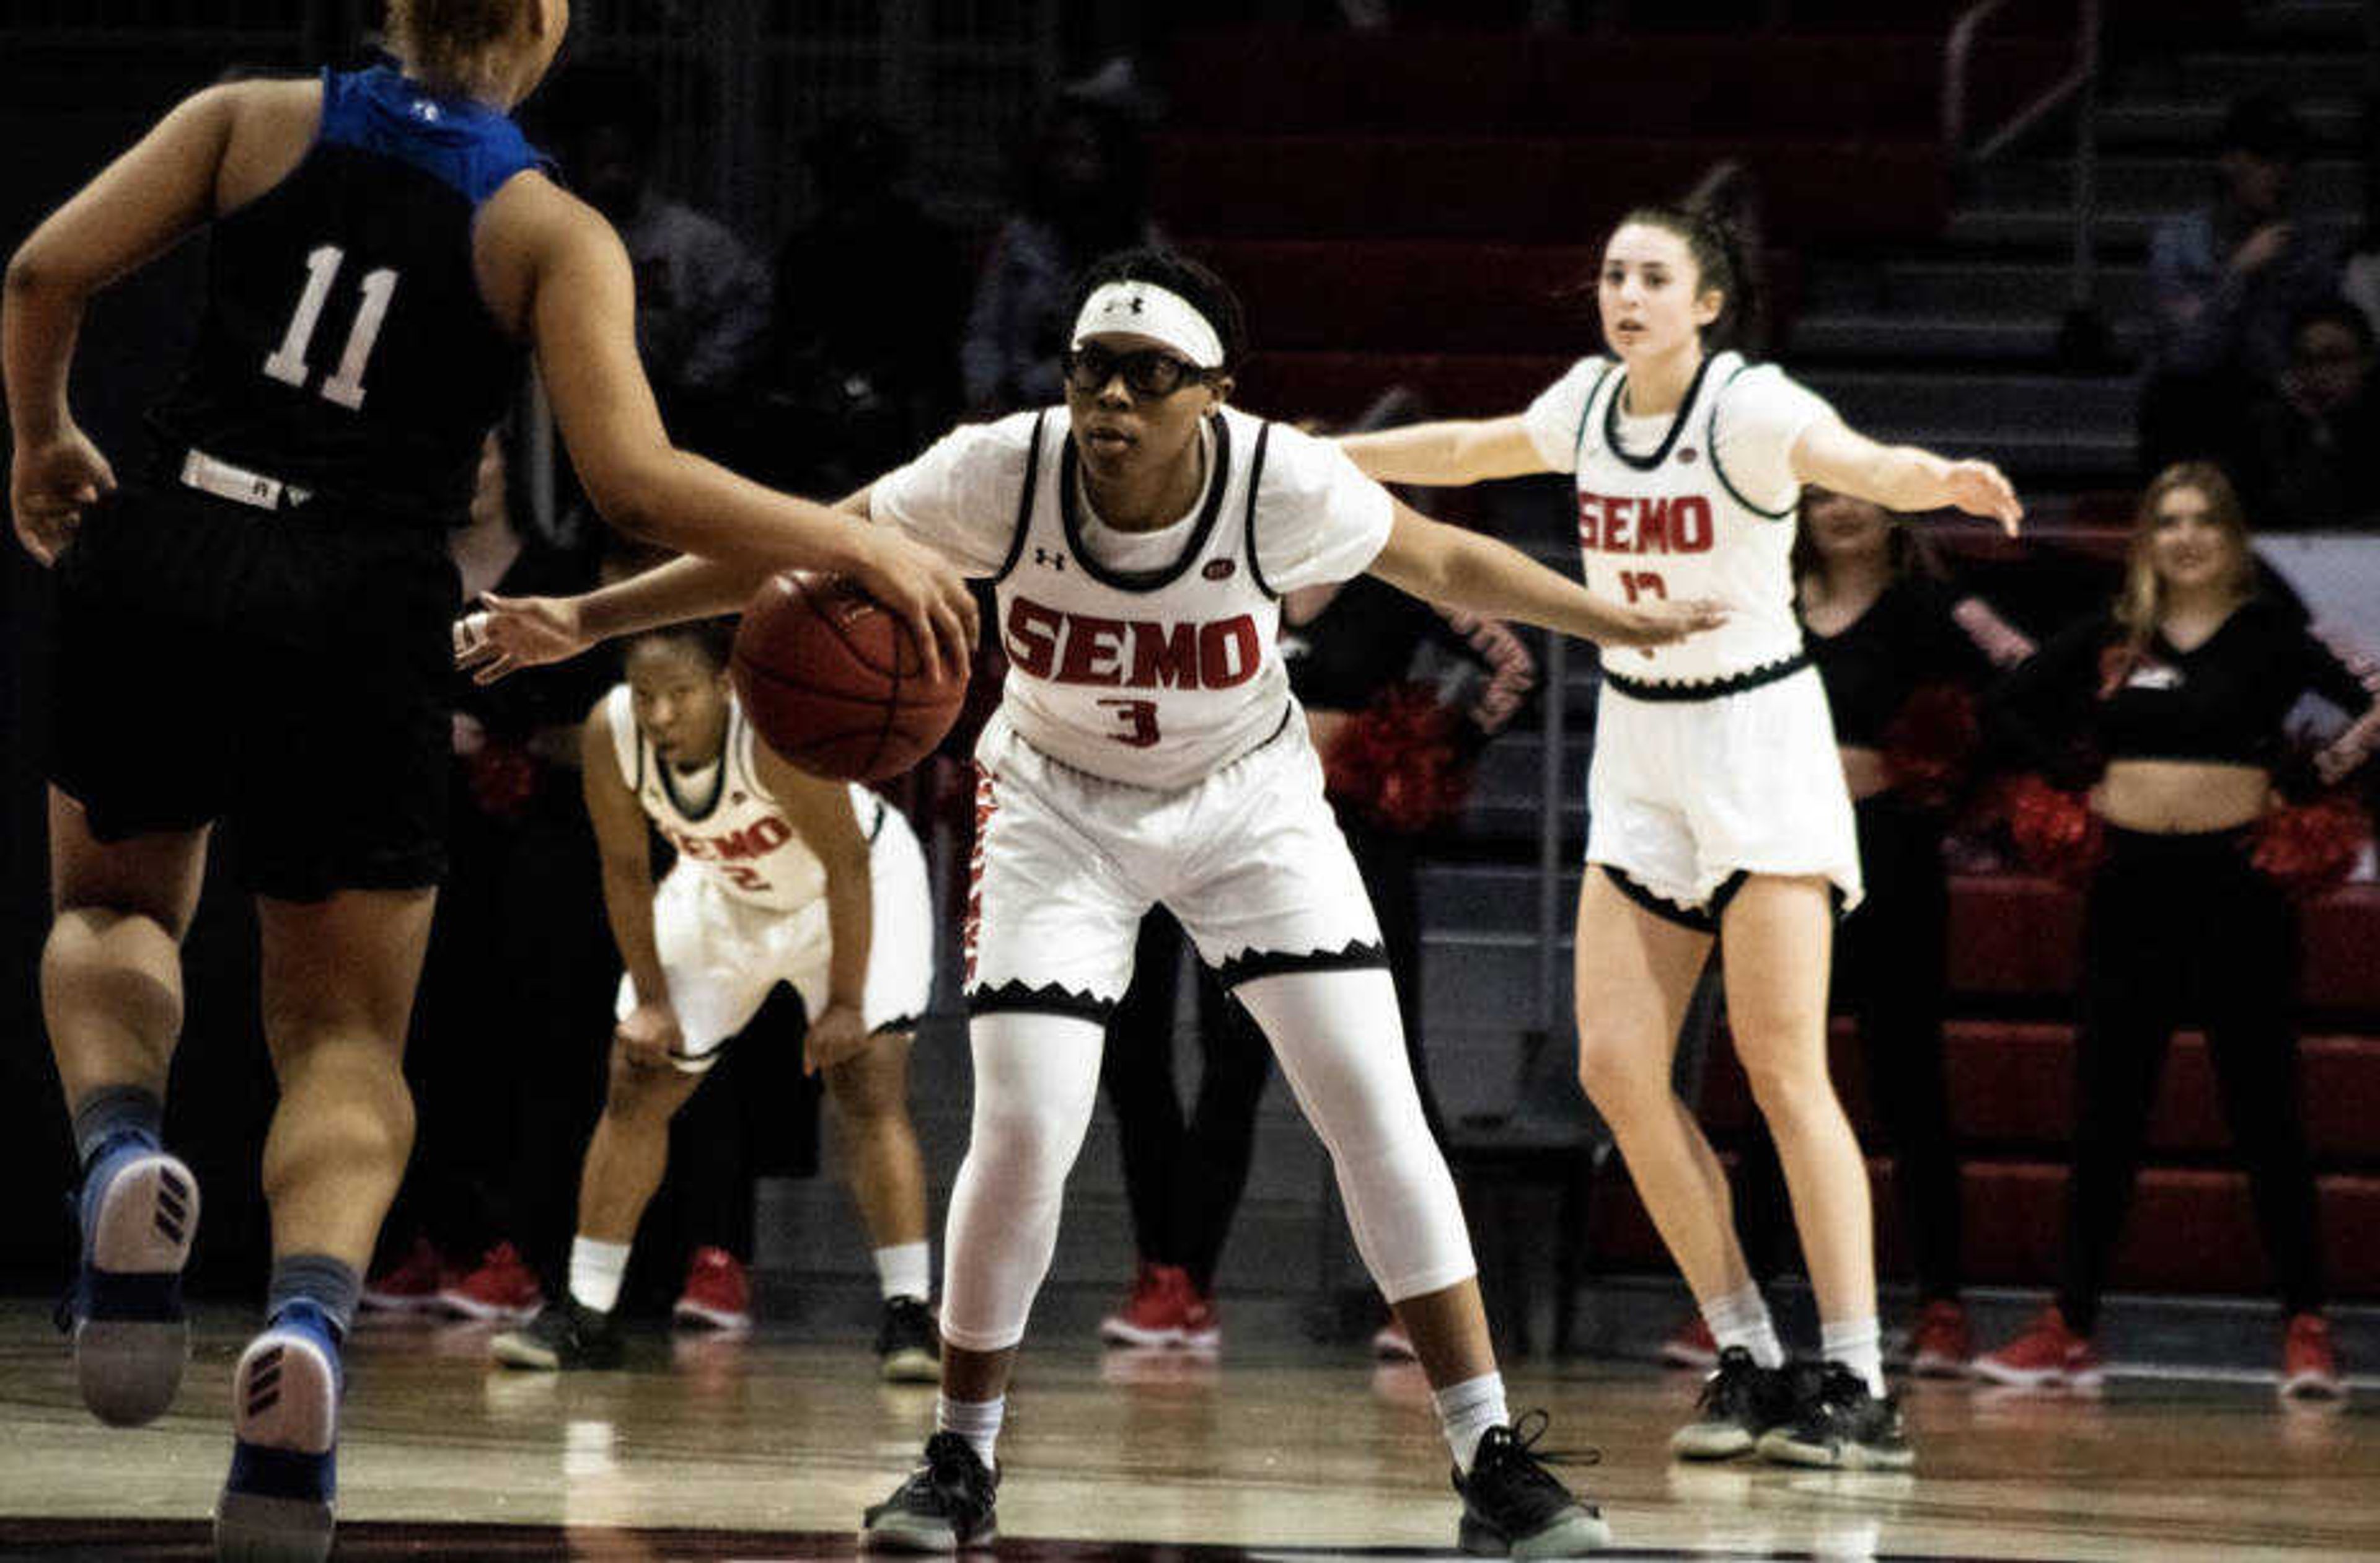 Women’s basketball clinches No. 3 seed in OVC tournament